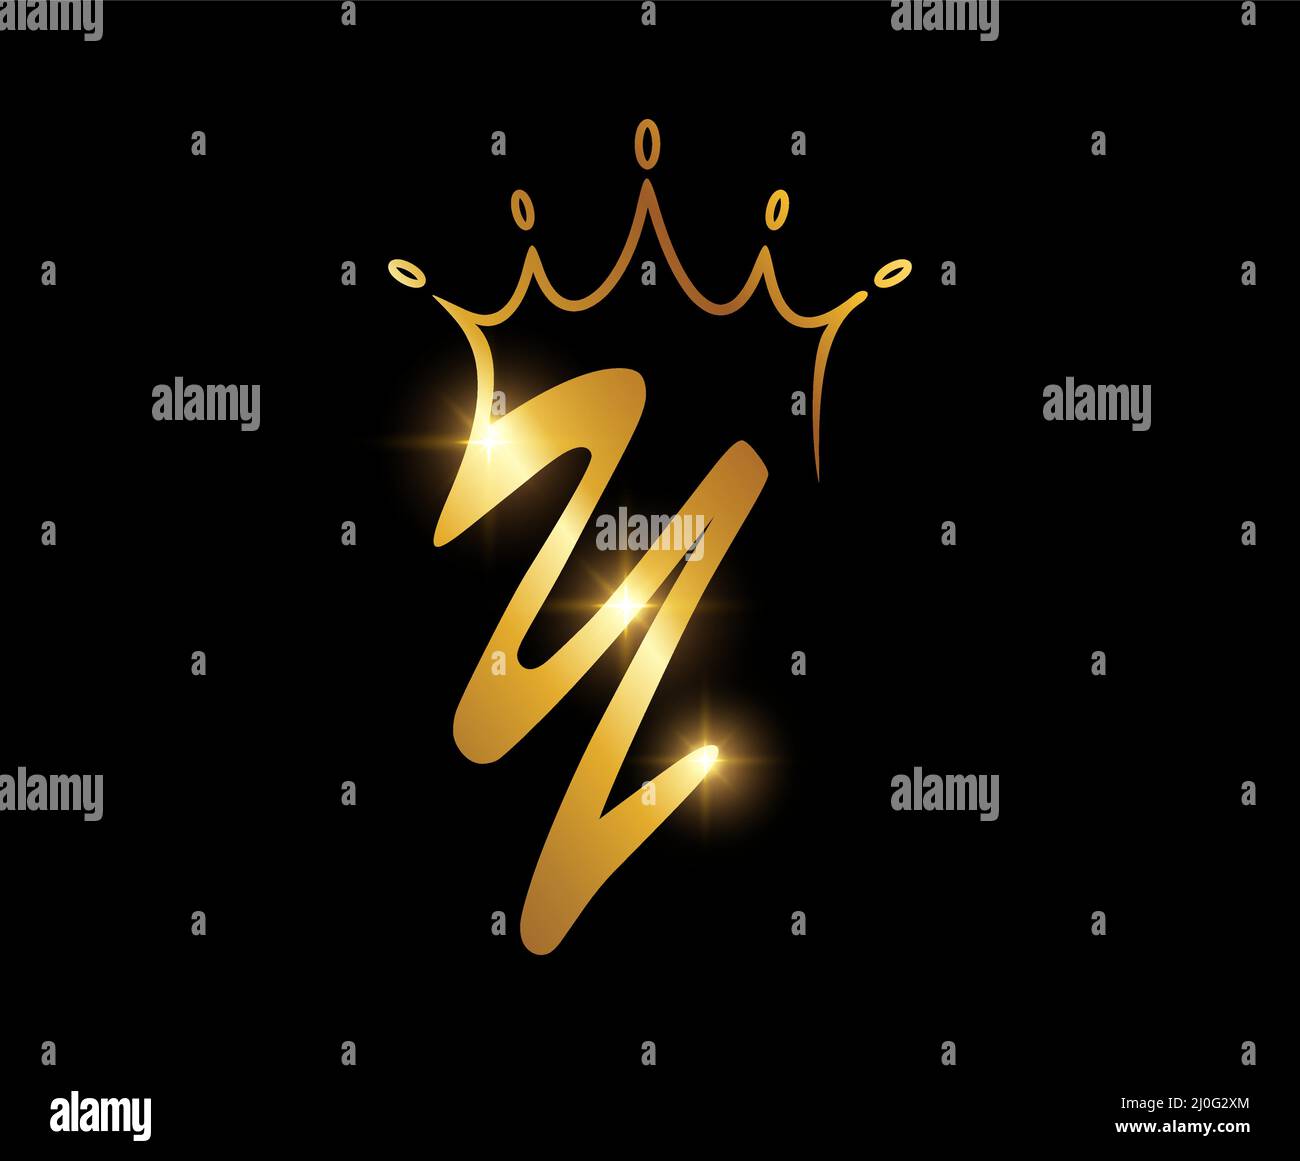 A vector illustration of Golden crown Monogram Logo Initial Letter Y in black background with gold shine effect, luxury letter y, Stock Vector